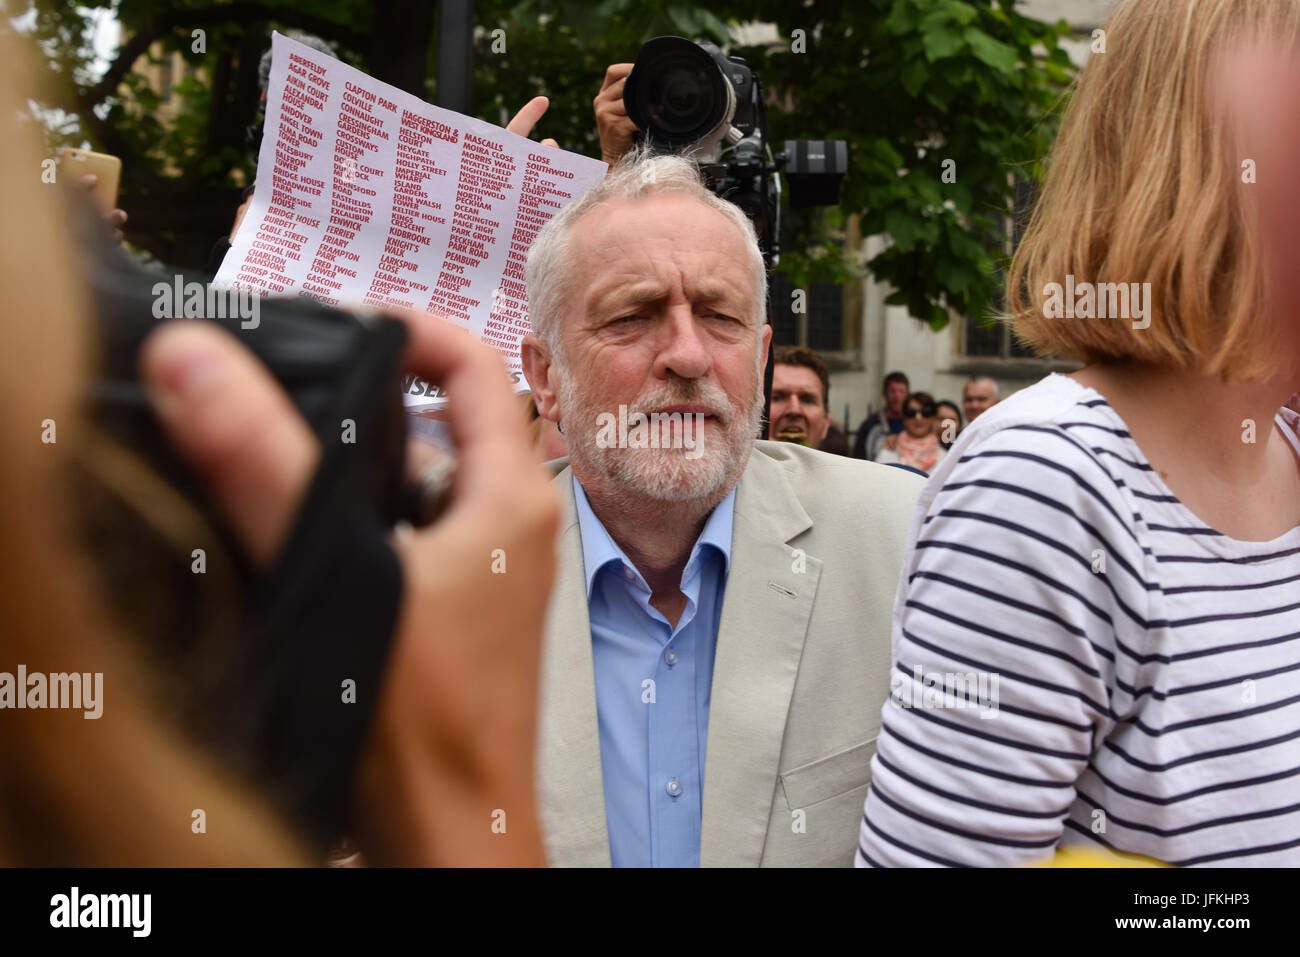 London, UK. 1st Jul, 2017. Jeremy Corbyn arrives in Parliament Square to give a speech at the 'Not One Day More' protest against the Conservative government. Thousands of protesters marched from Regent Street to Parliament Square, with other speechs from Diane Abbott, John McDonnell and Owen Jones. Credit: Jacob Sacks-Jones/Alamy Live News. Stock Photo